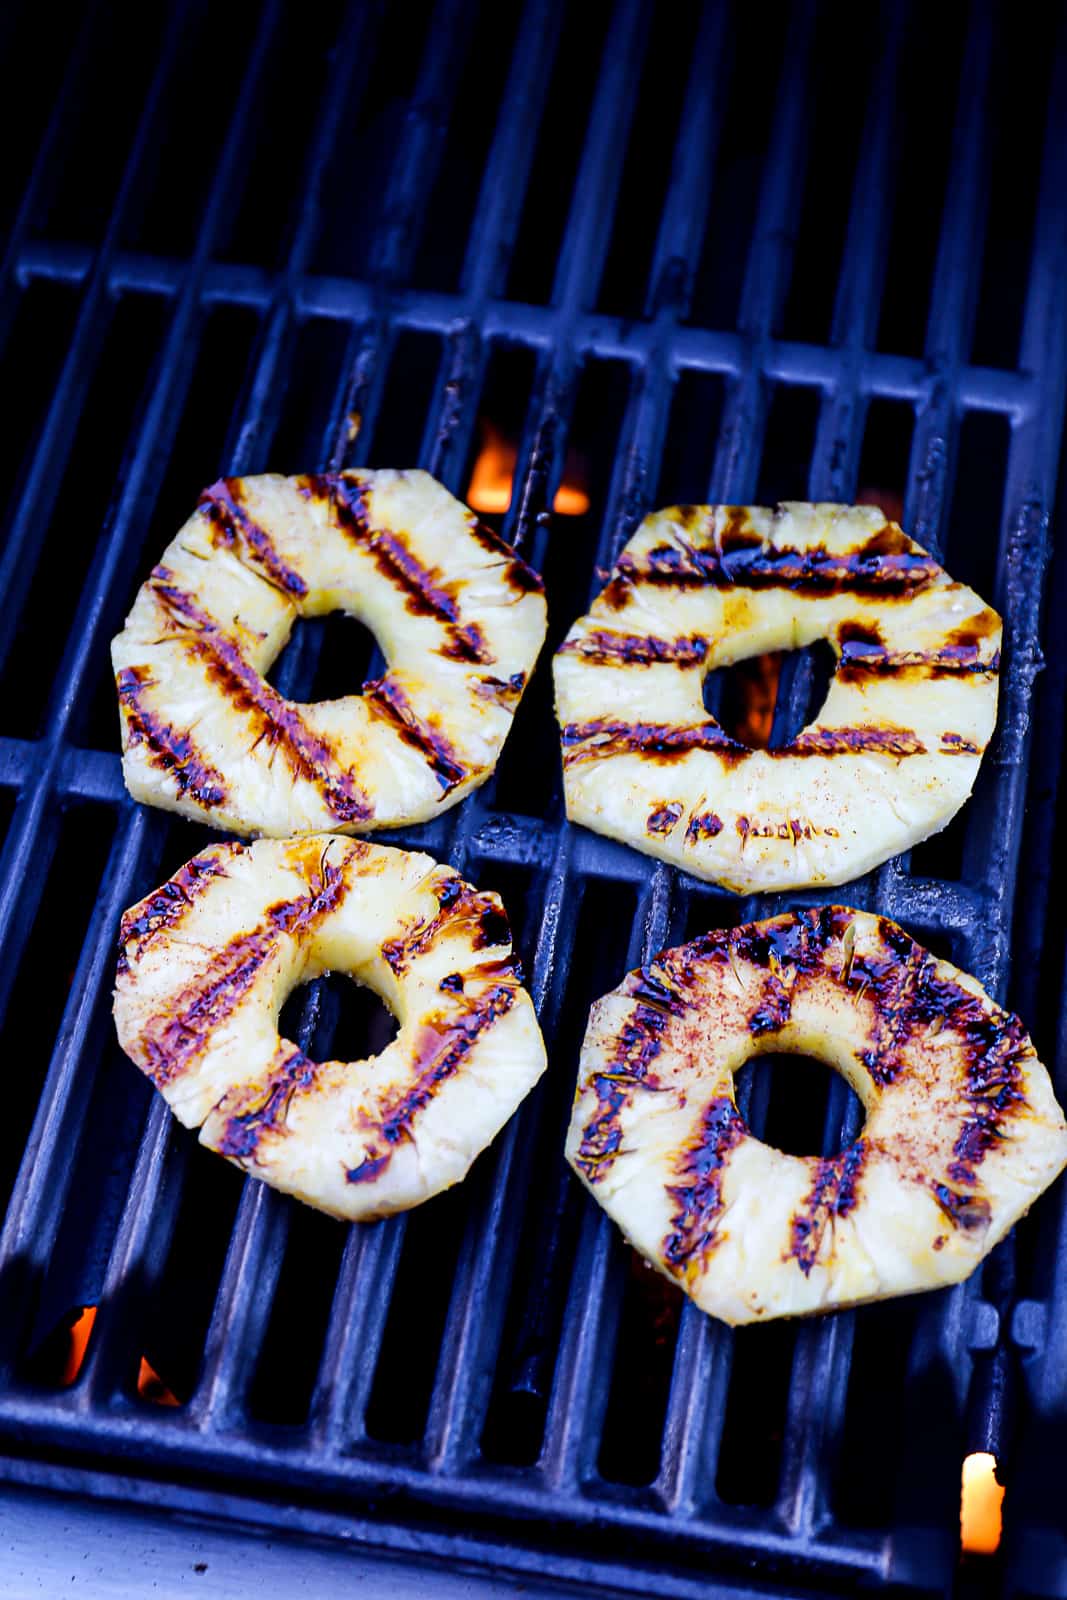 Grilling pineapple slices on a gas grill on high heat